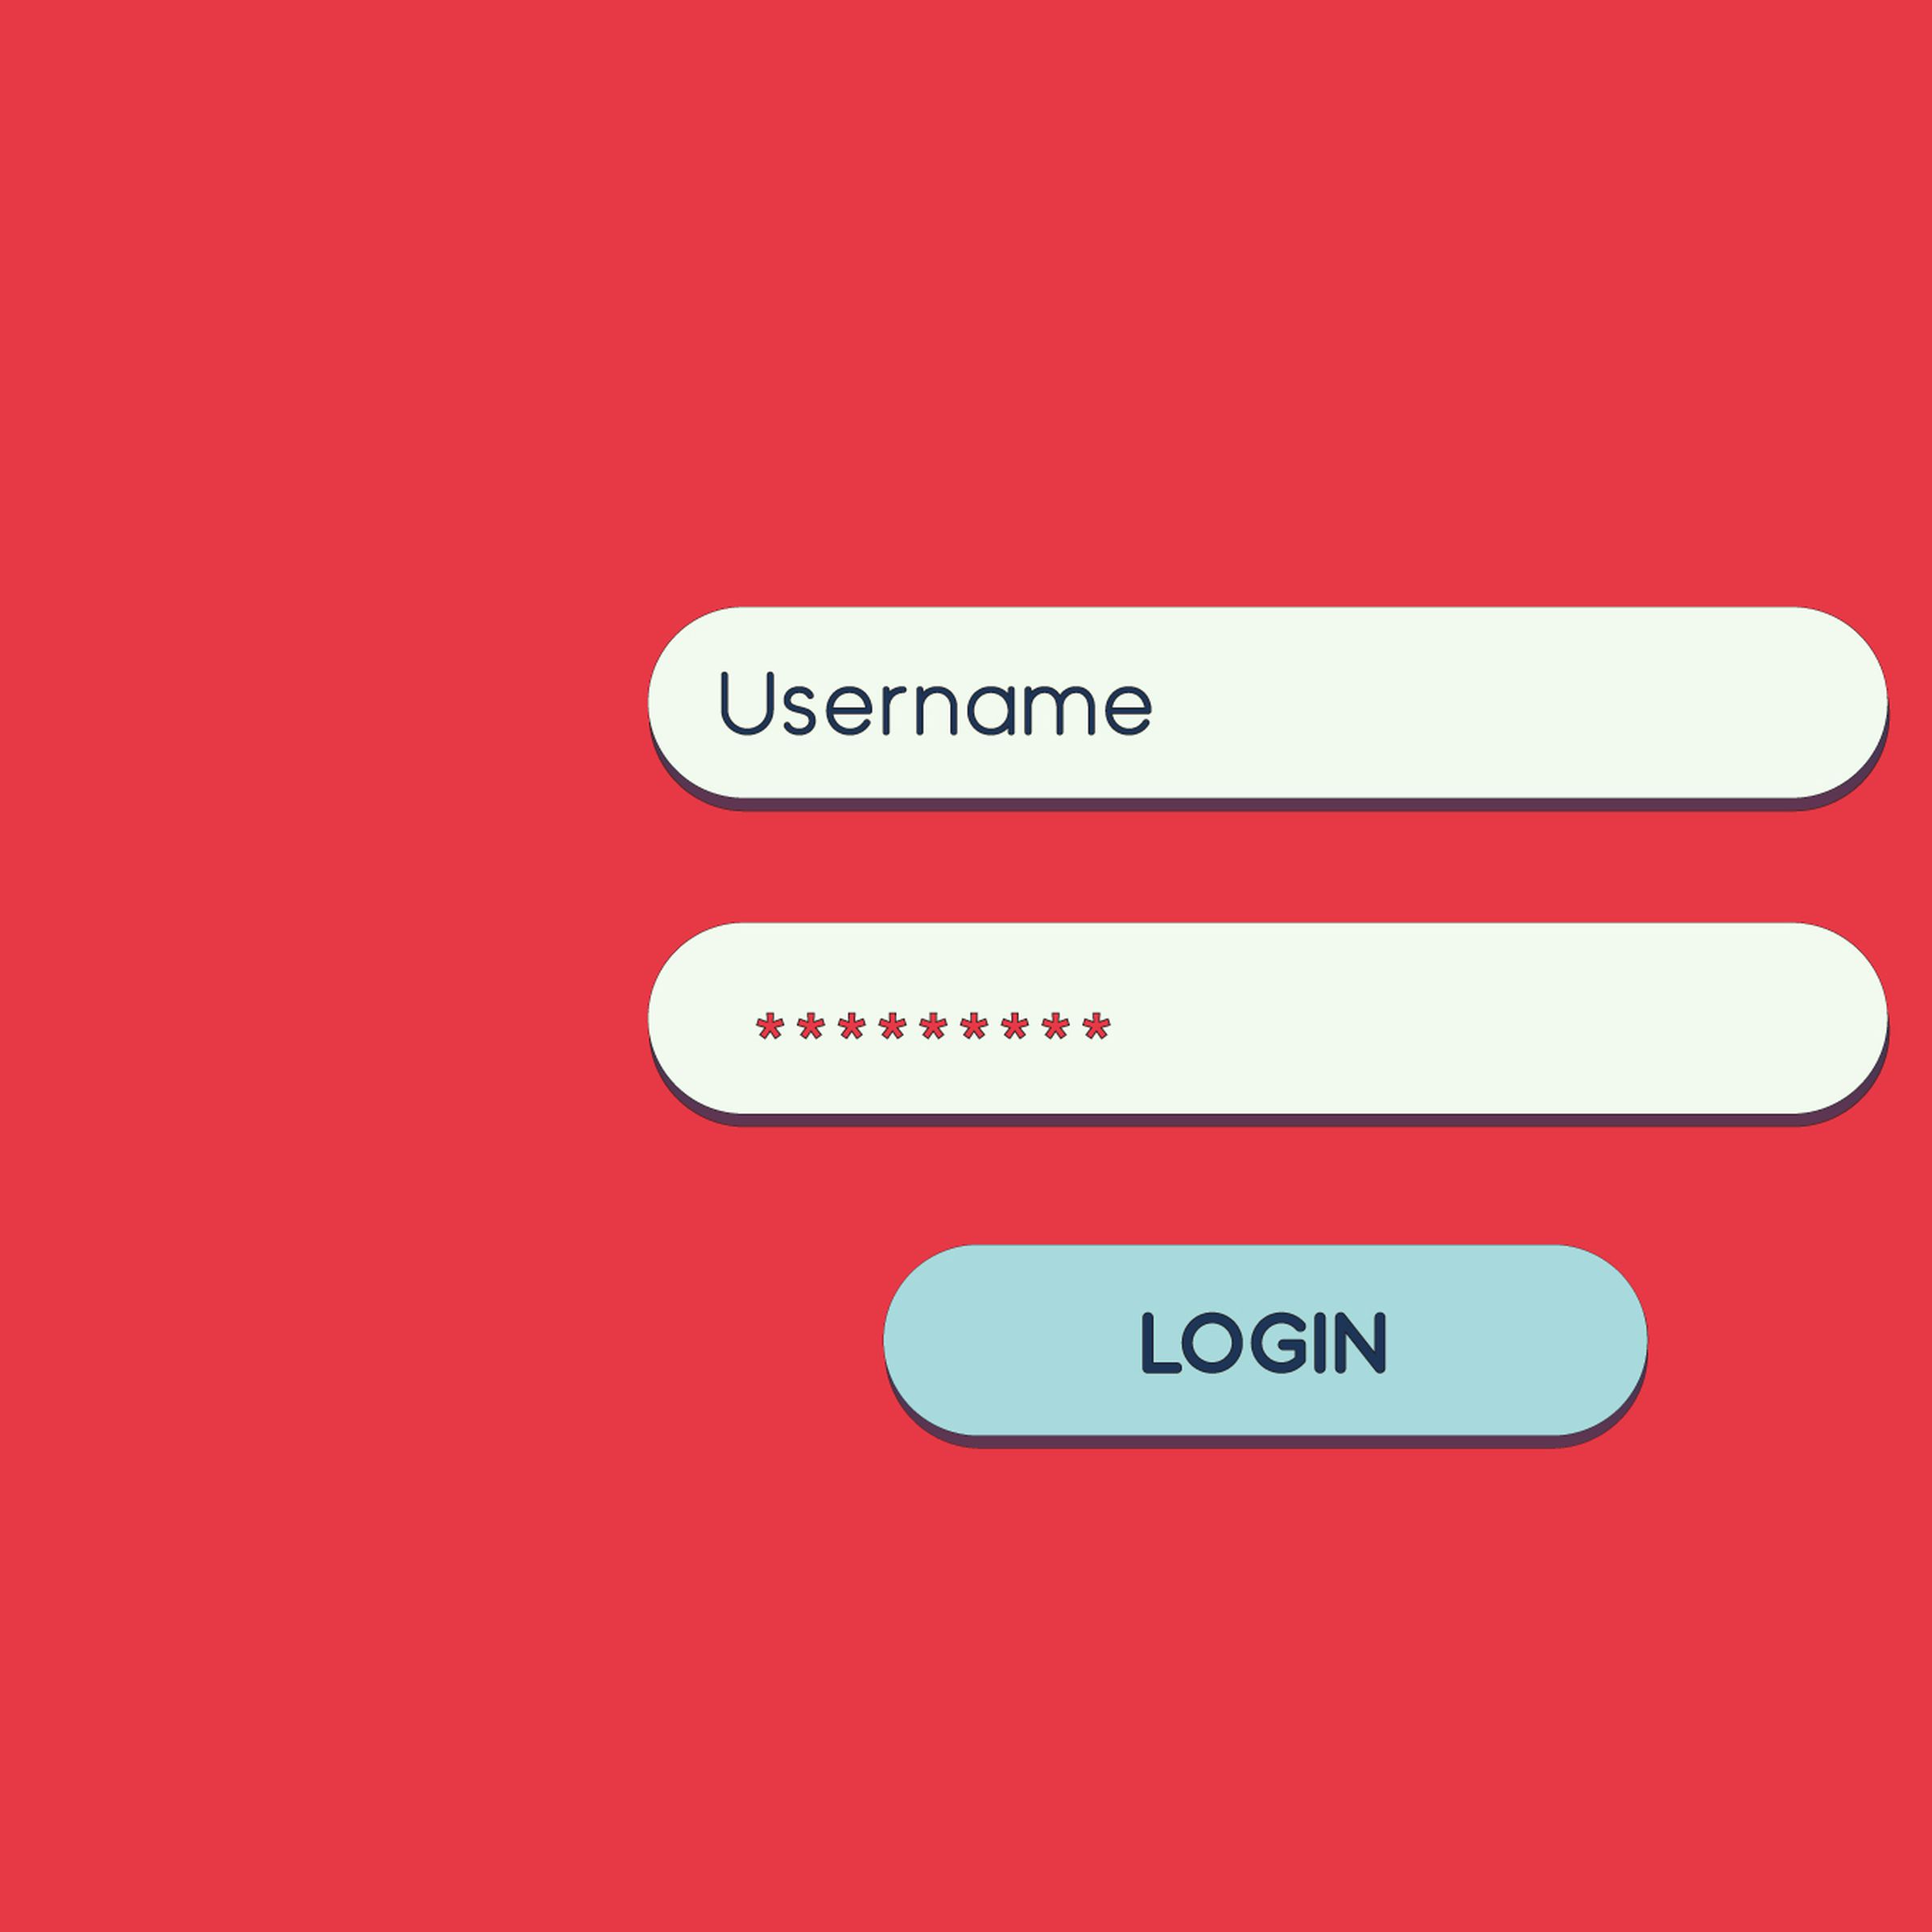 An image of a login prompt, one I don’t want to fill out